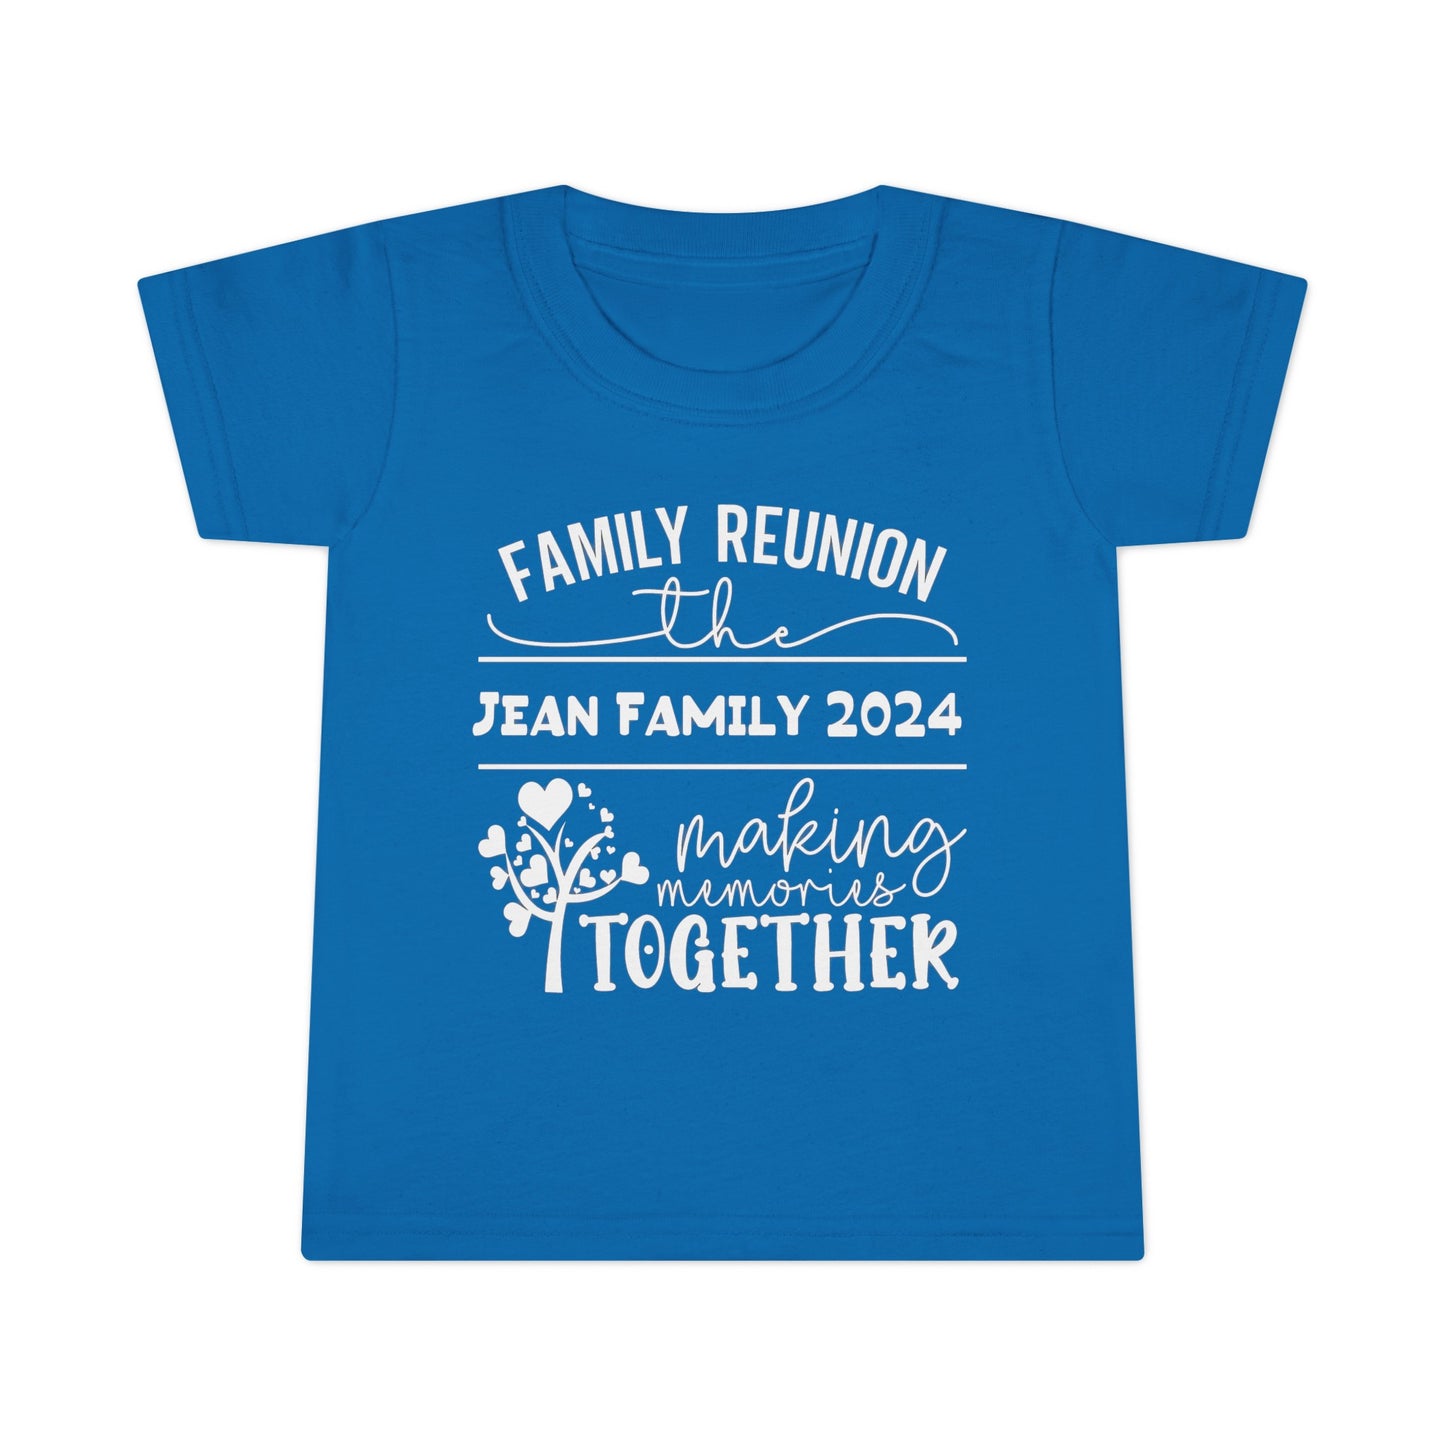 For Toddler Shirt - The Jeans Family Reunion 2024 Official Shirt